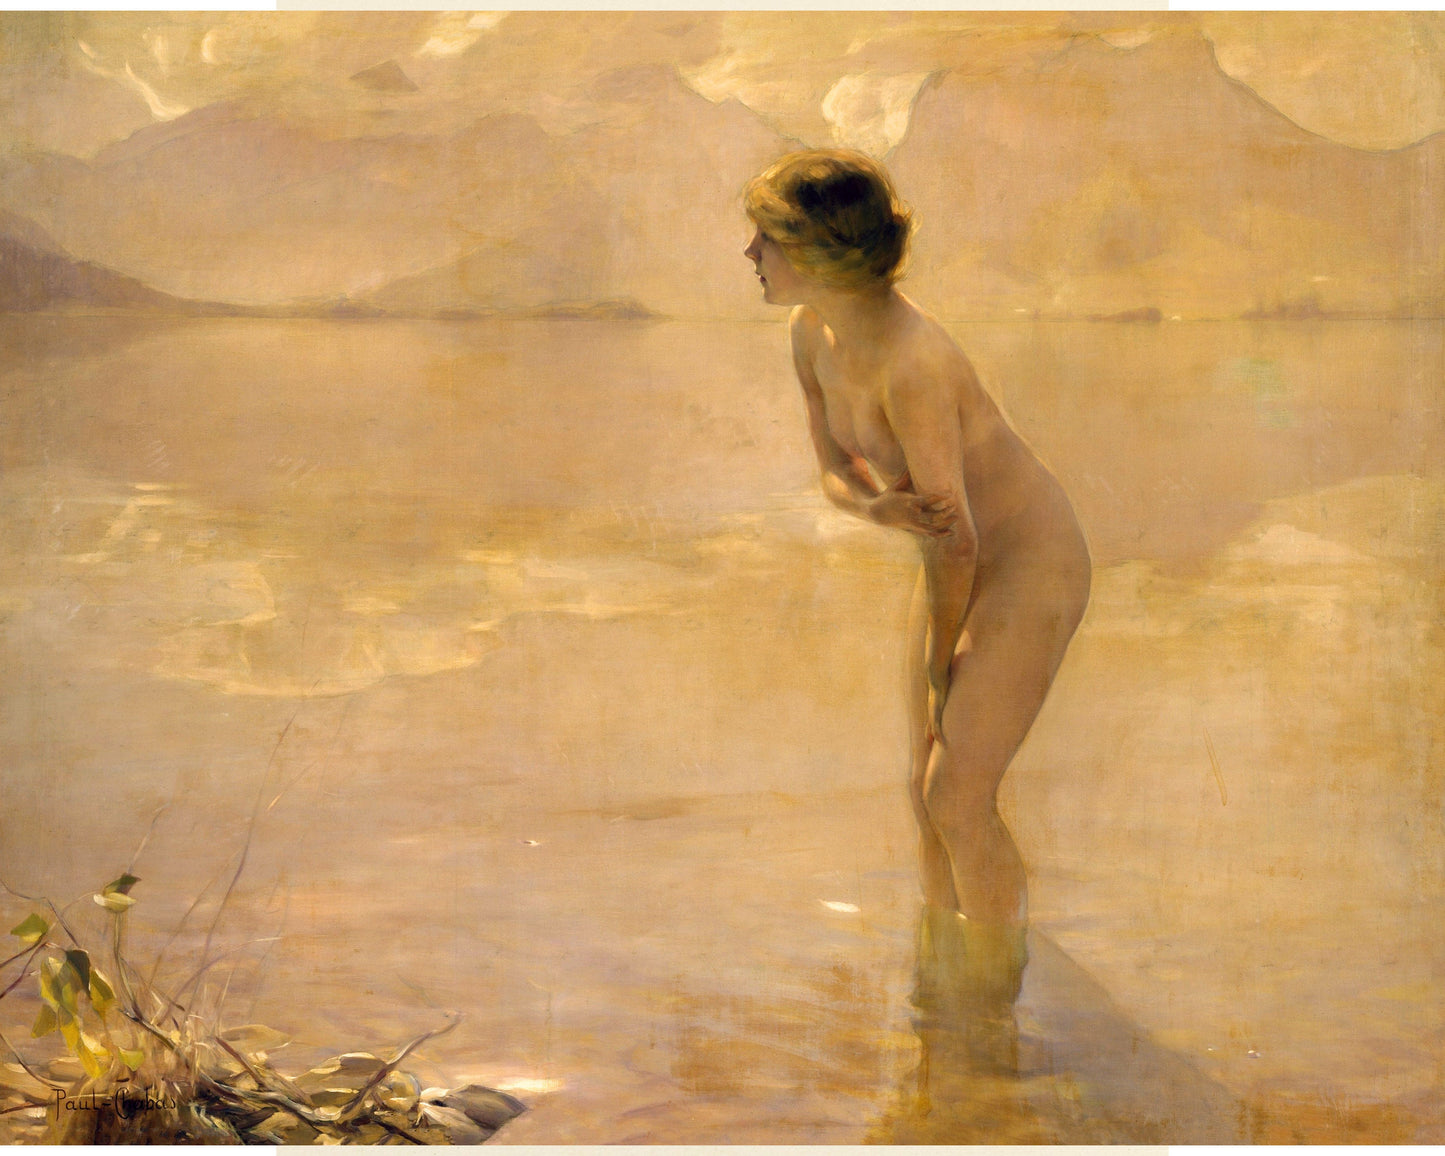 September Morn by Paul Chabas